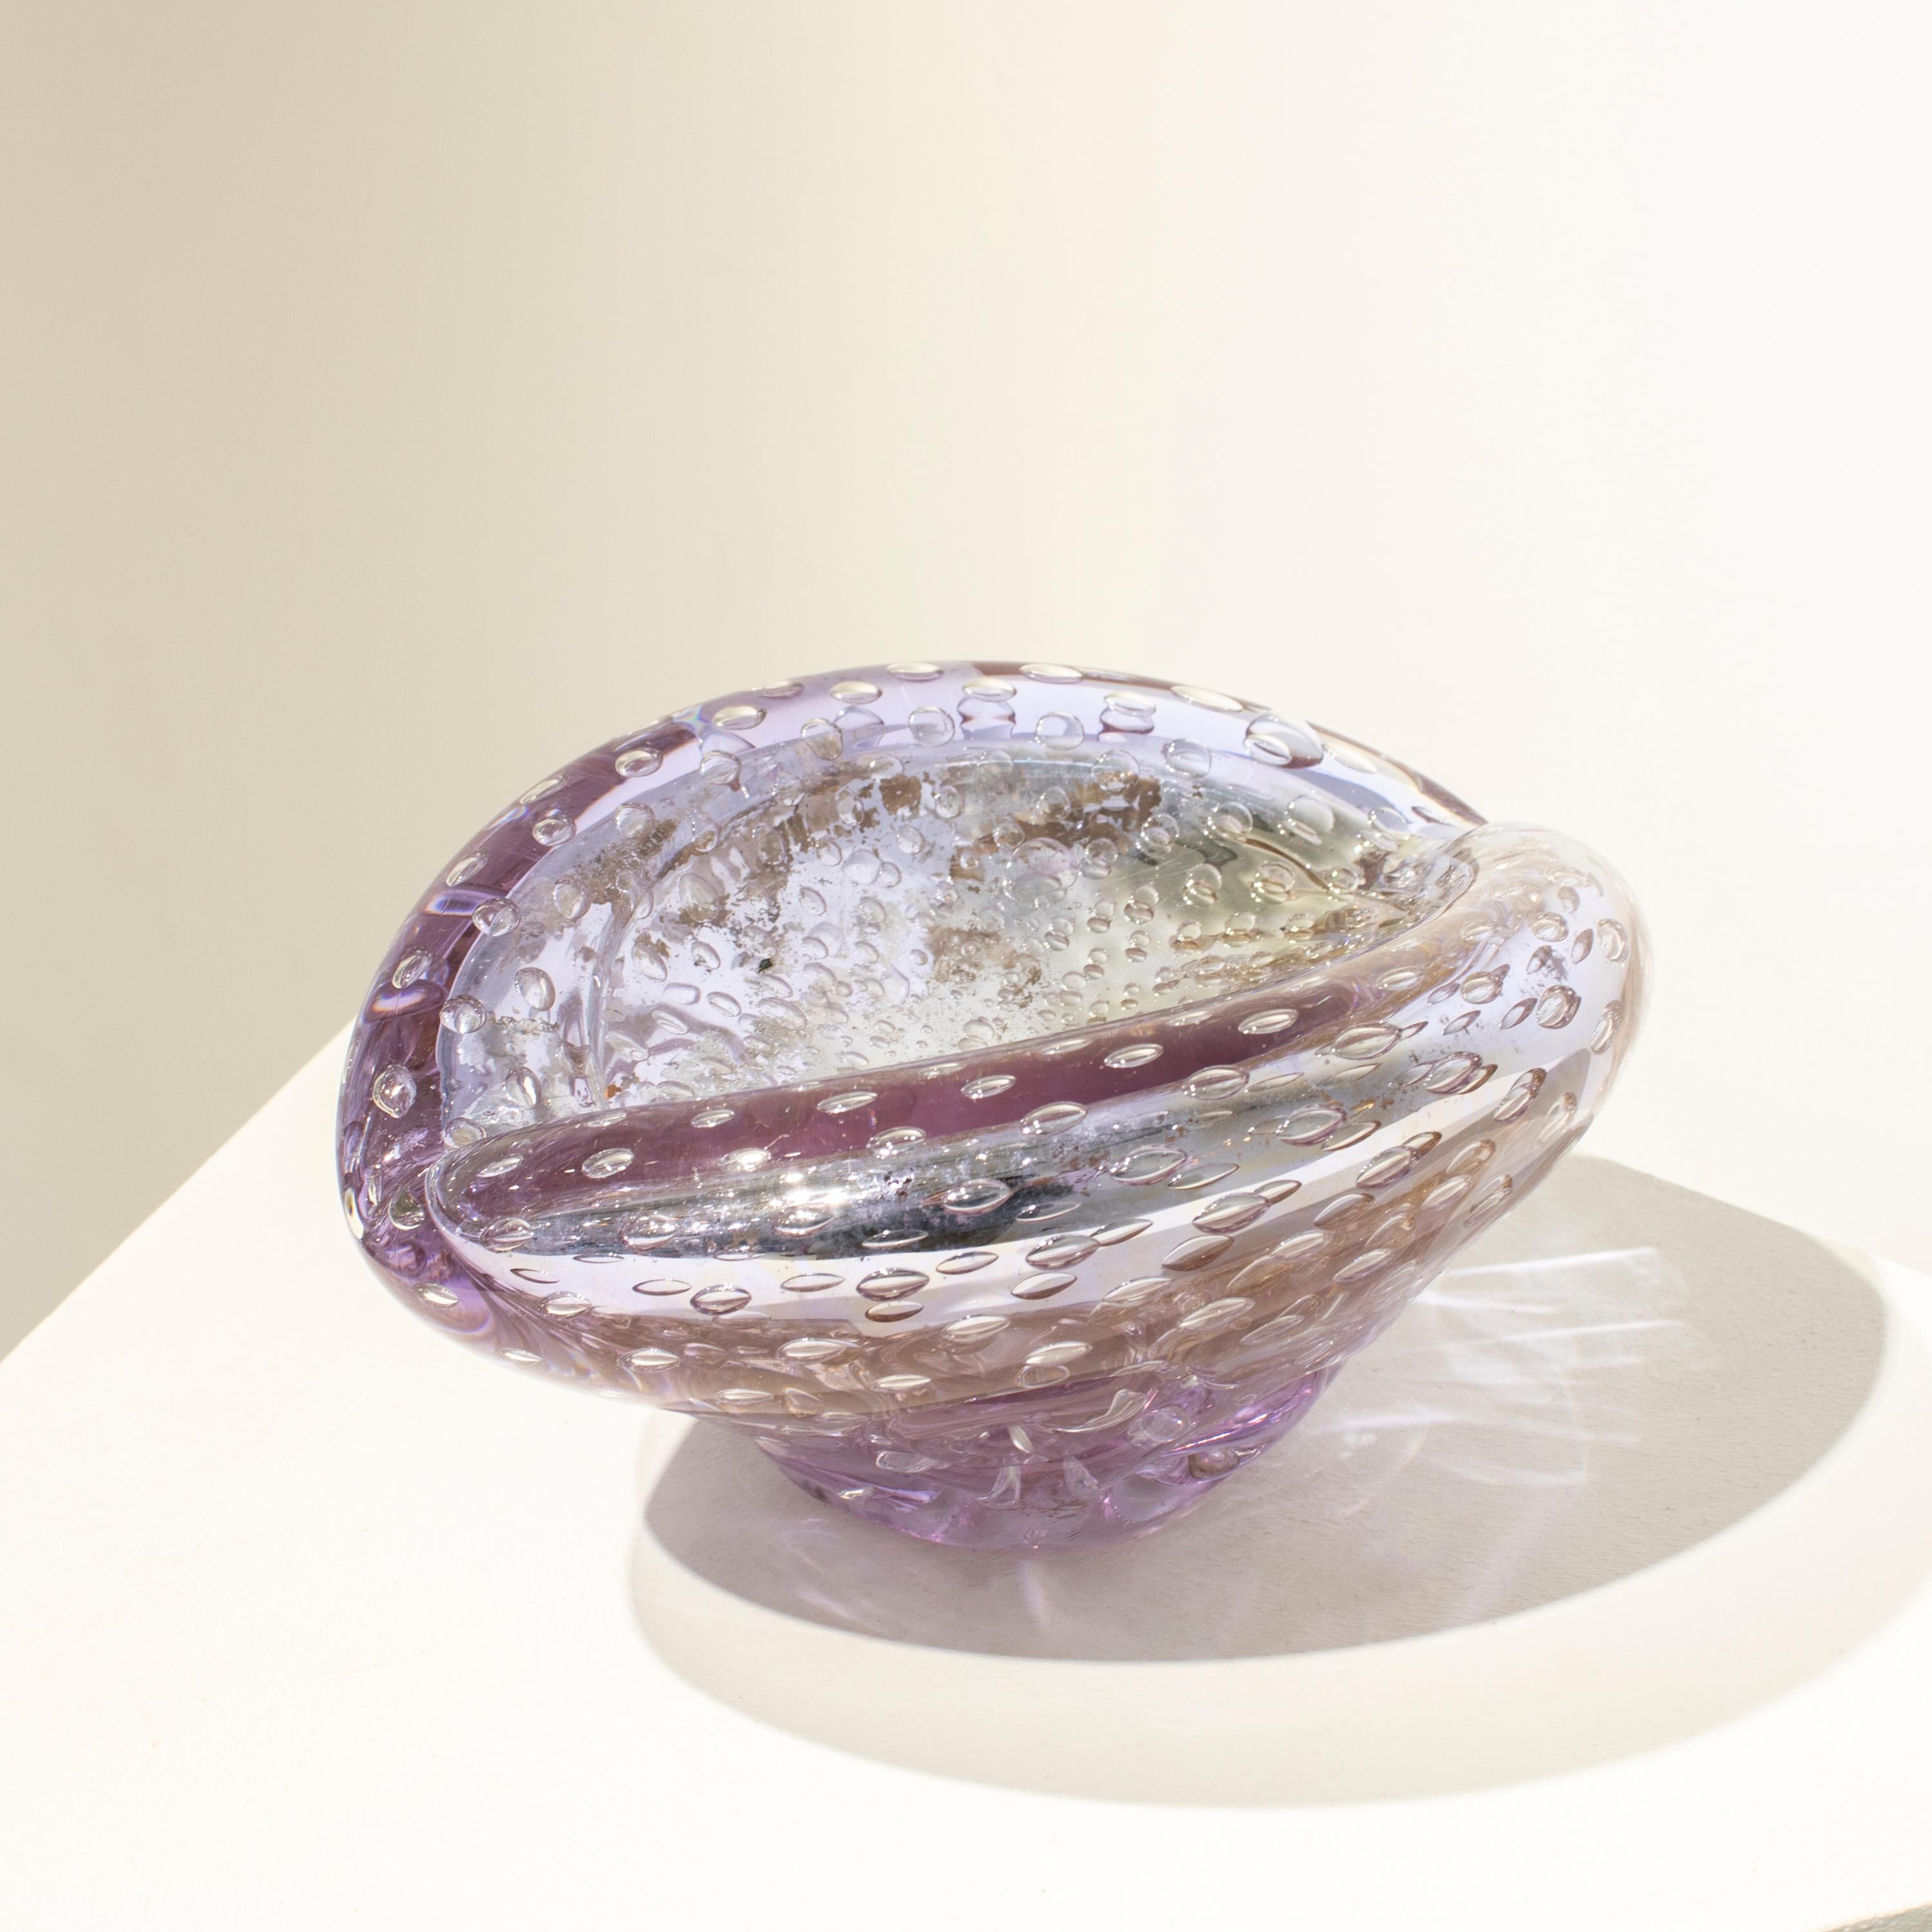 Italian Vase designed in the 1970´s, hand-crafted in Murano glass with a curved shape, in lilac, with small inside bubbles.